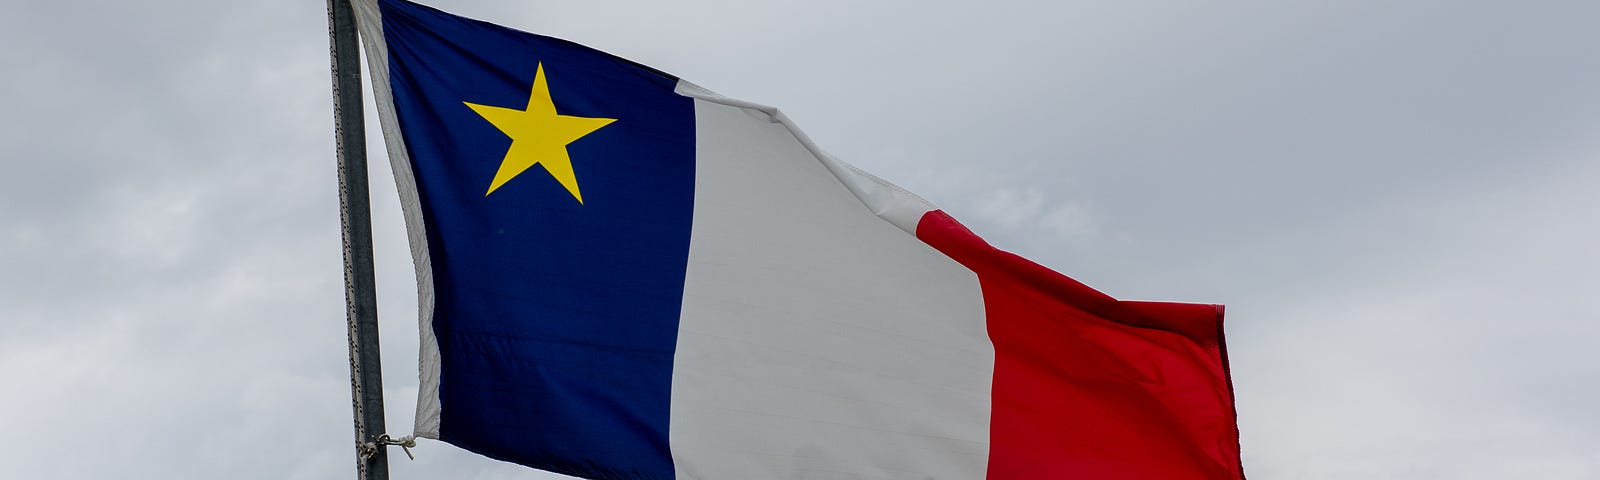 Image of the Acadian flag. It is the French flag with the addition of a gold star in the upper left-hand corner of the flag.